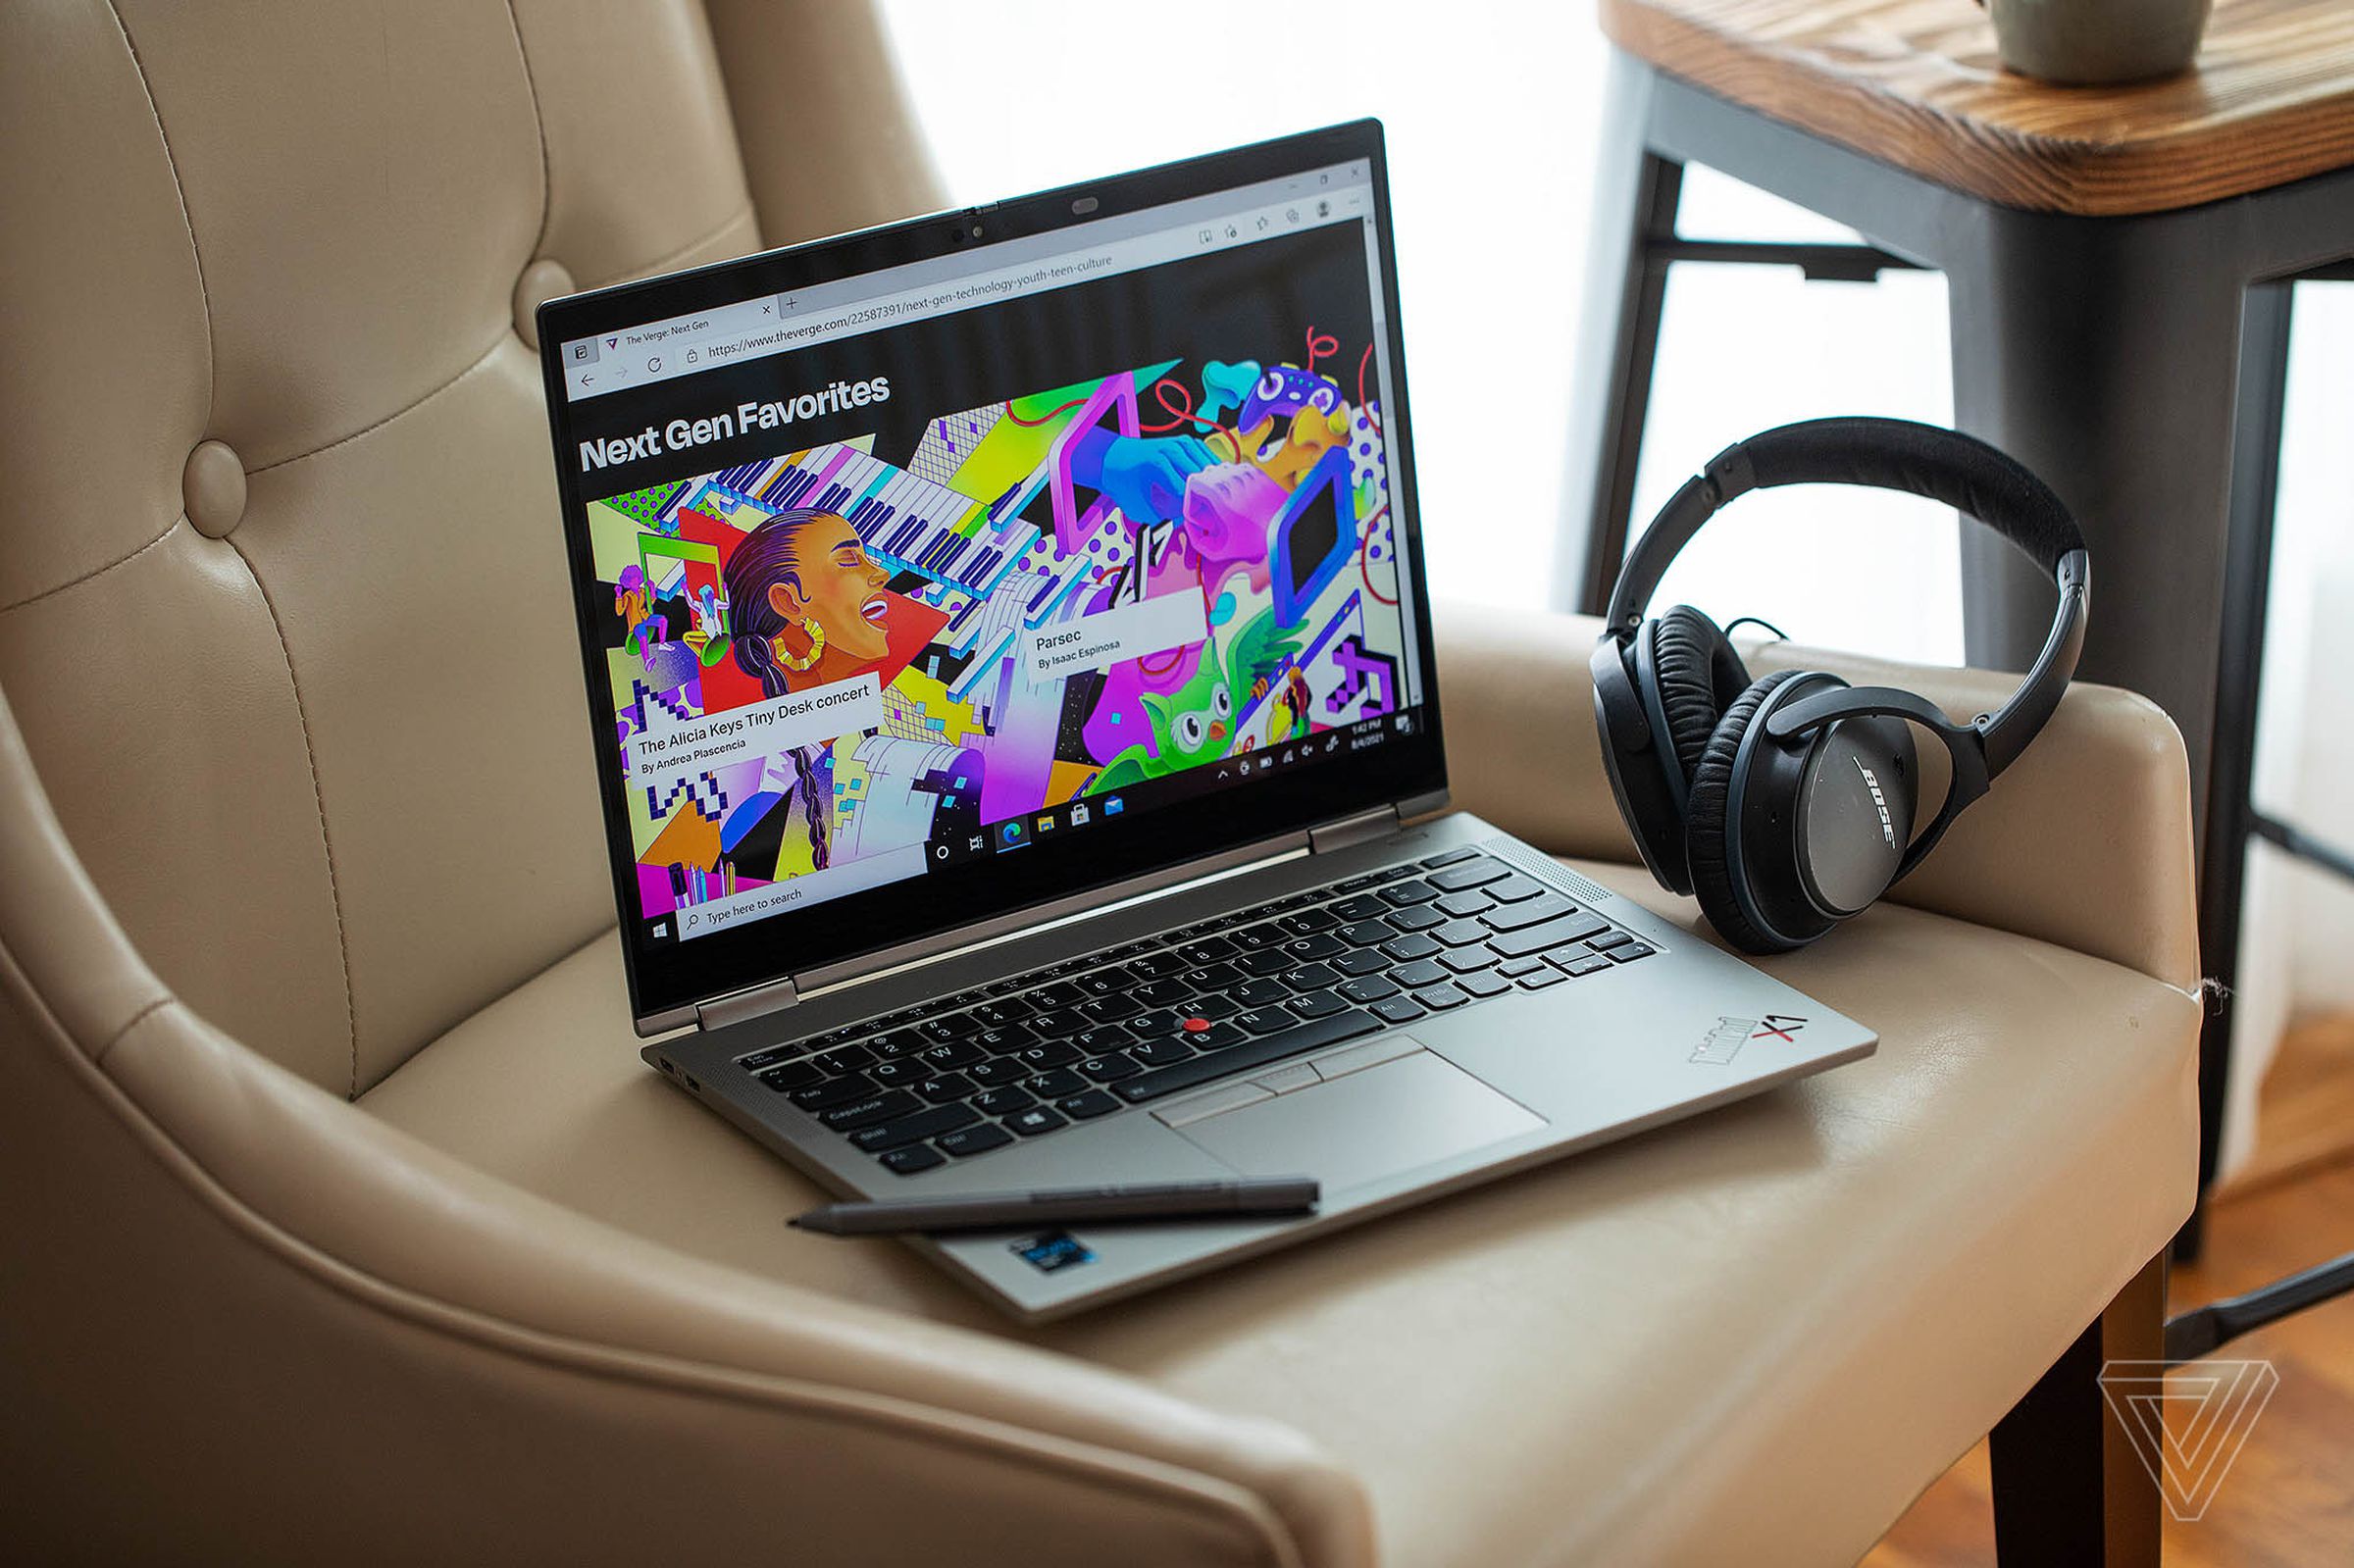 The Lenovo ThinkPad X1 Titanium Yoga on an armchair, open, angled to the right, seen from above with the stylus diagonally acorss its left palm rest and a pair of black headphones to its right side.